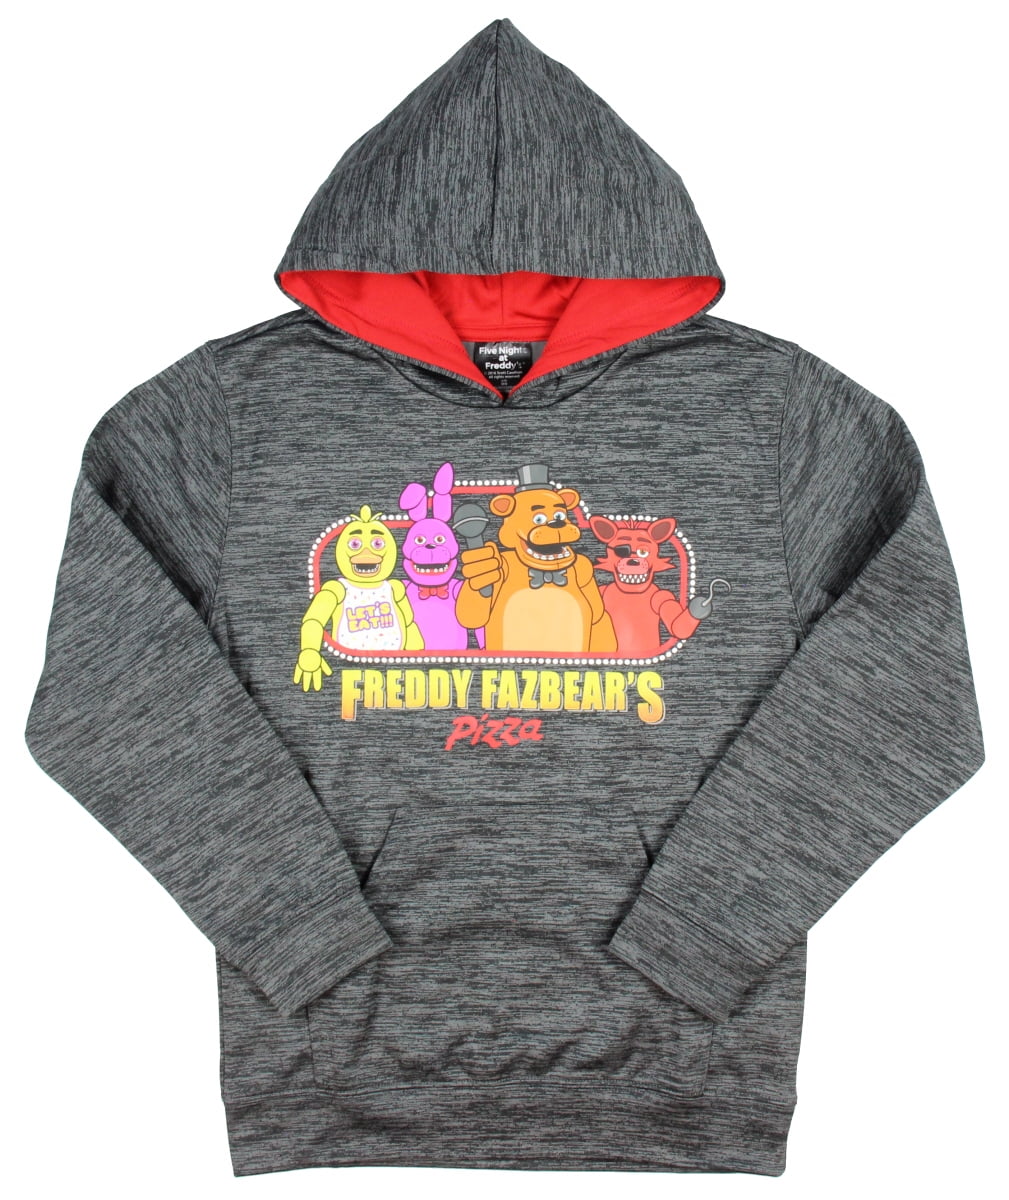 Five Nights at Freddy's FNAF Game Kids Youth Pullover Funny Hoodies Sweatshirts 